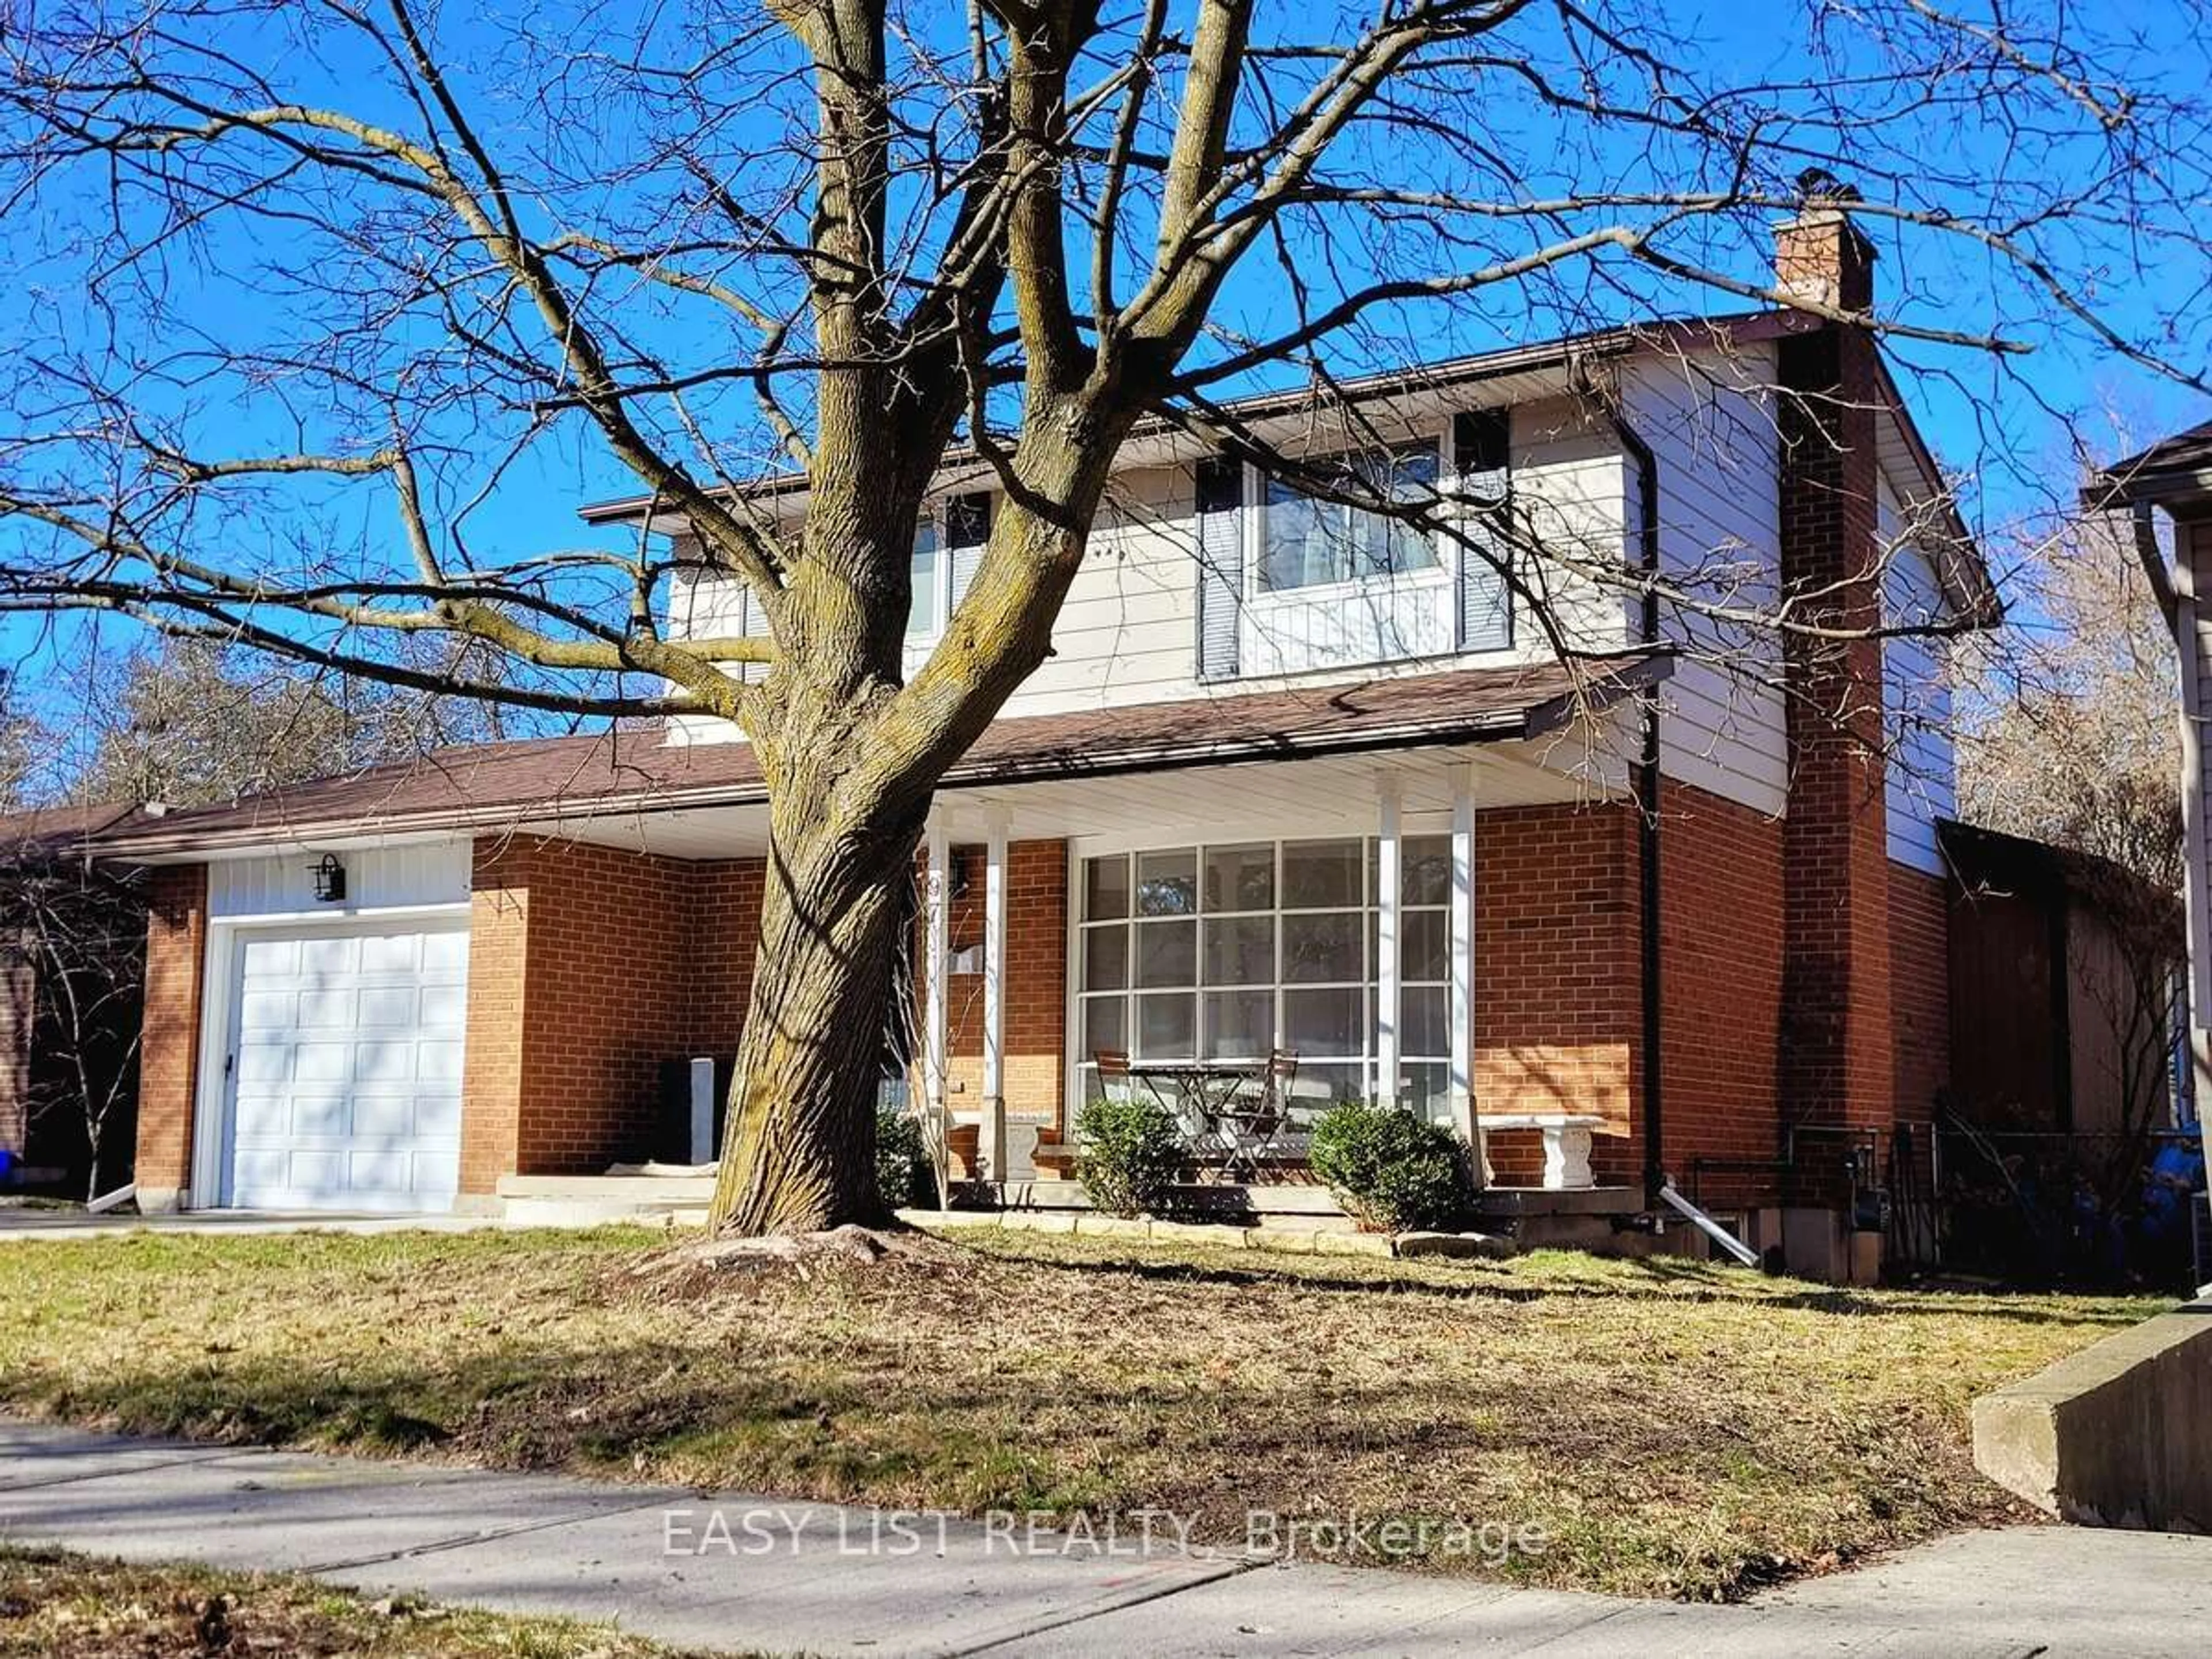 Home with brick exterior material for 97 Century Hill Dr, Kitchener Ontario N2E 2E3